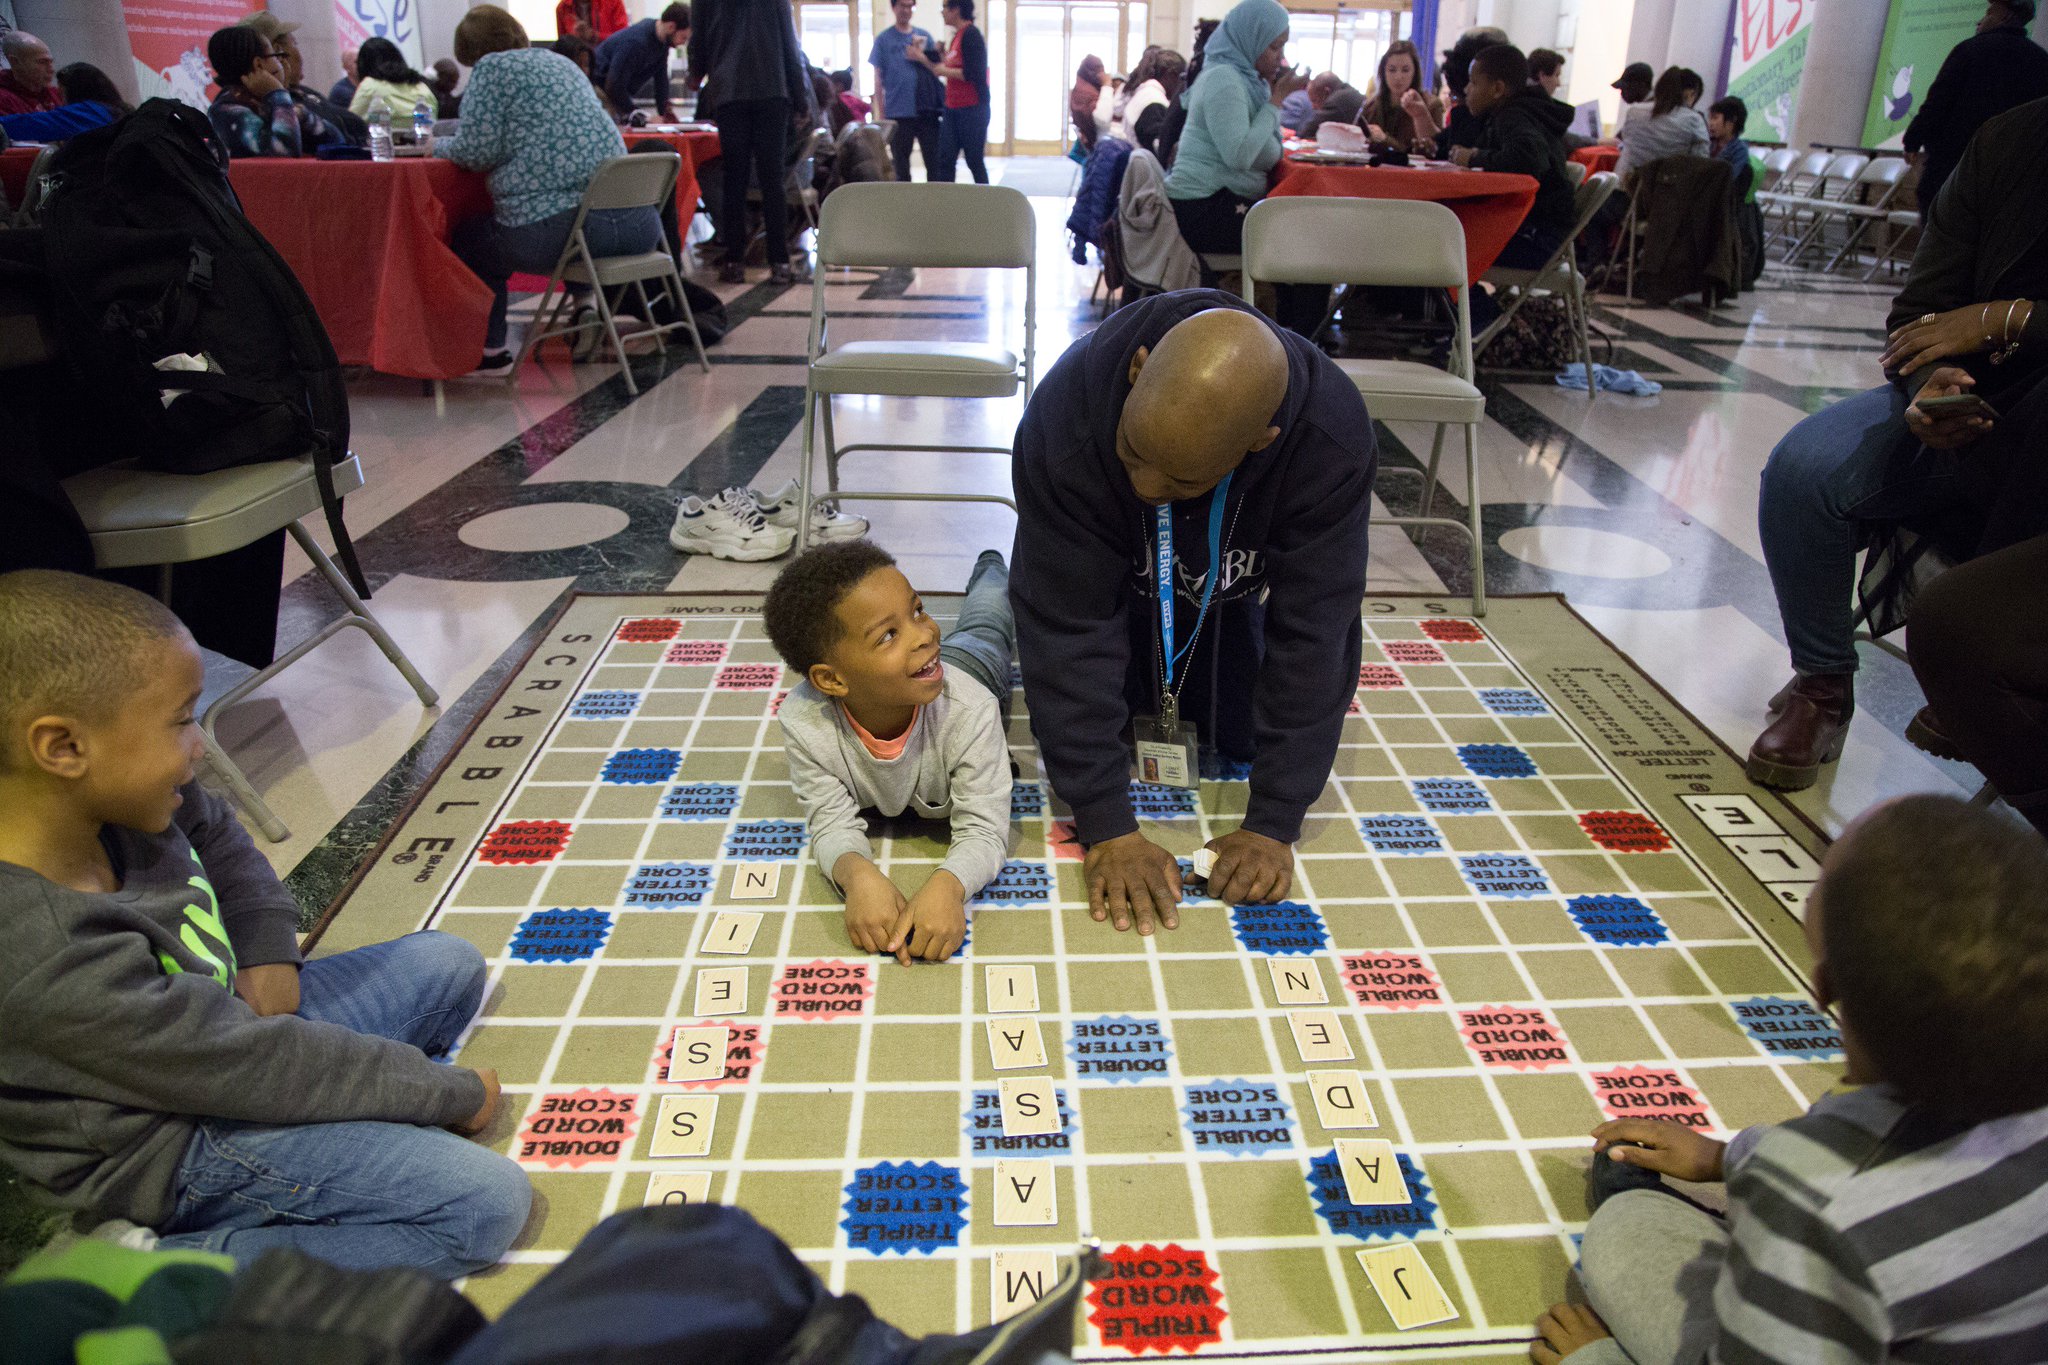 After School Activities Partnerships facilitates programs like chess clubs and Scrabble tournaments. (Photo courtesy of Philly ASAP.)